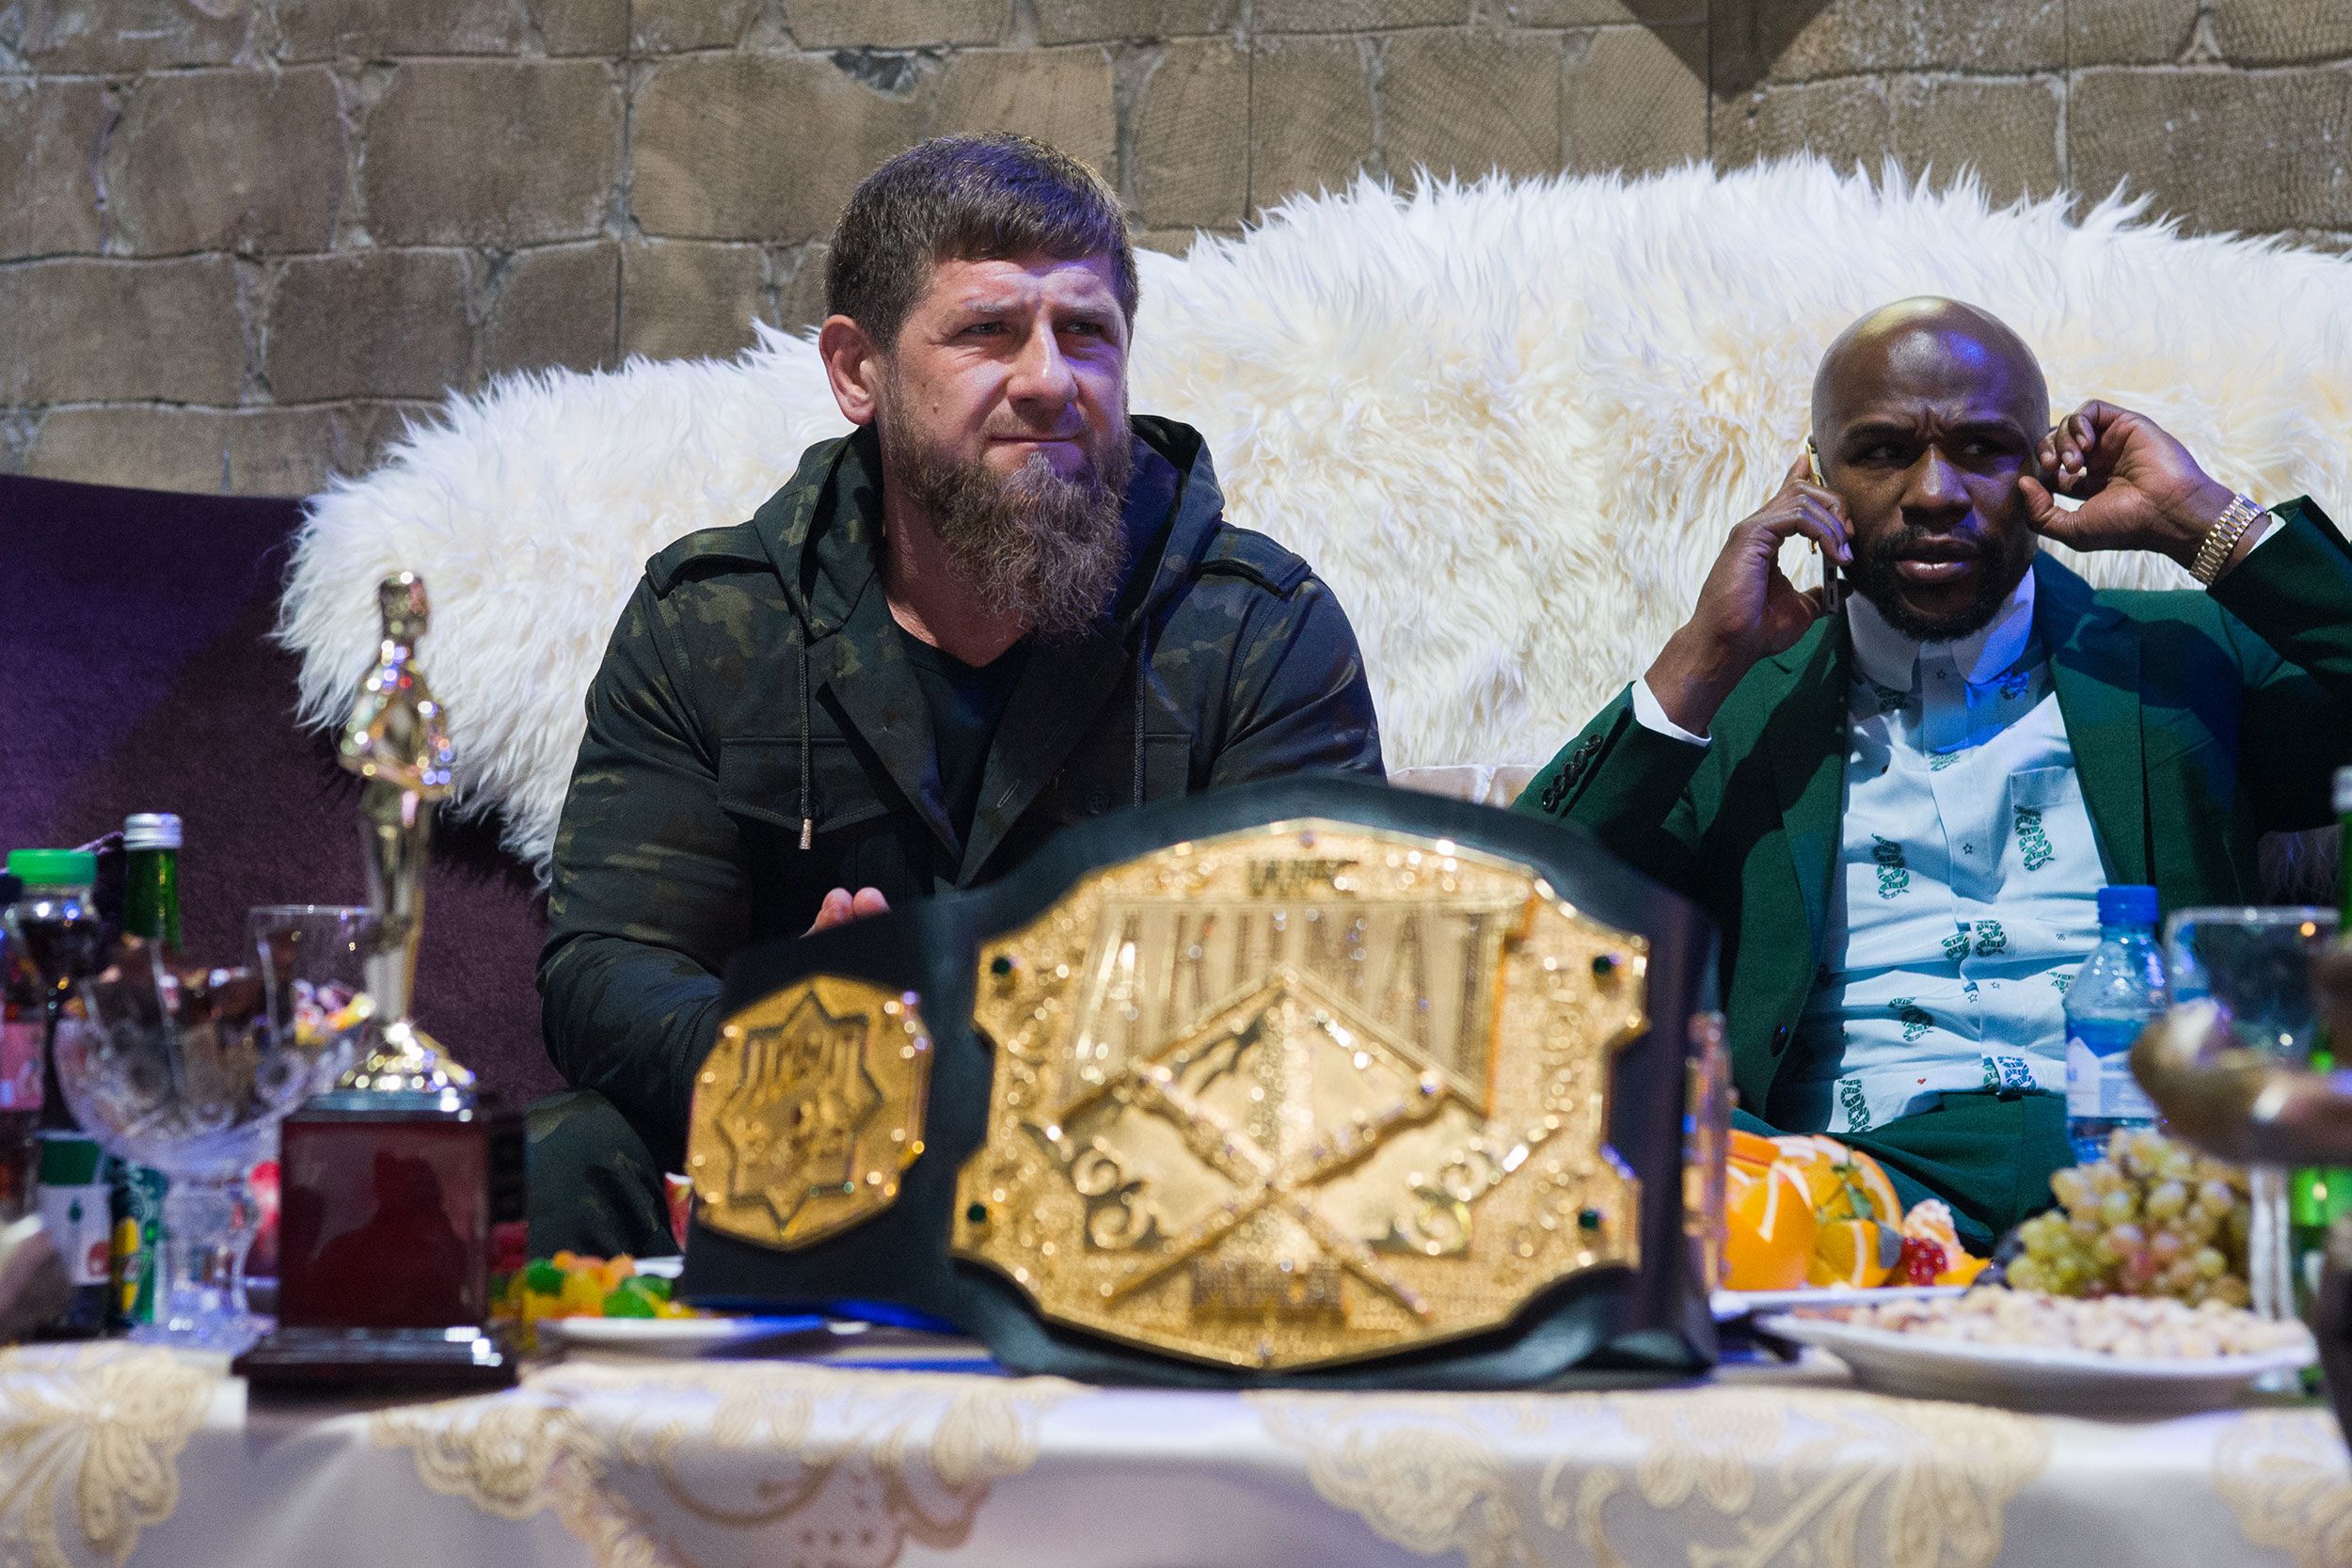 Chechen Leader Has More Interactions With UFC Fighters Amid US Sanctions -  The New York Times